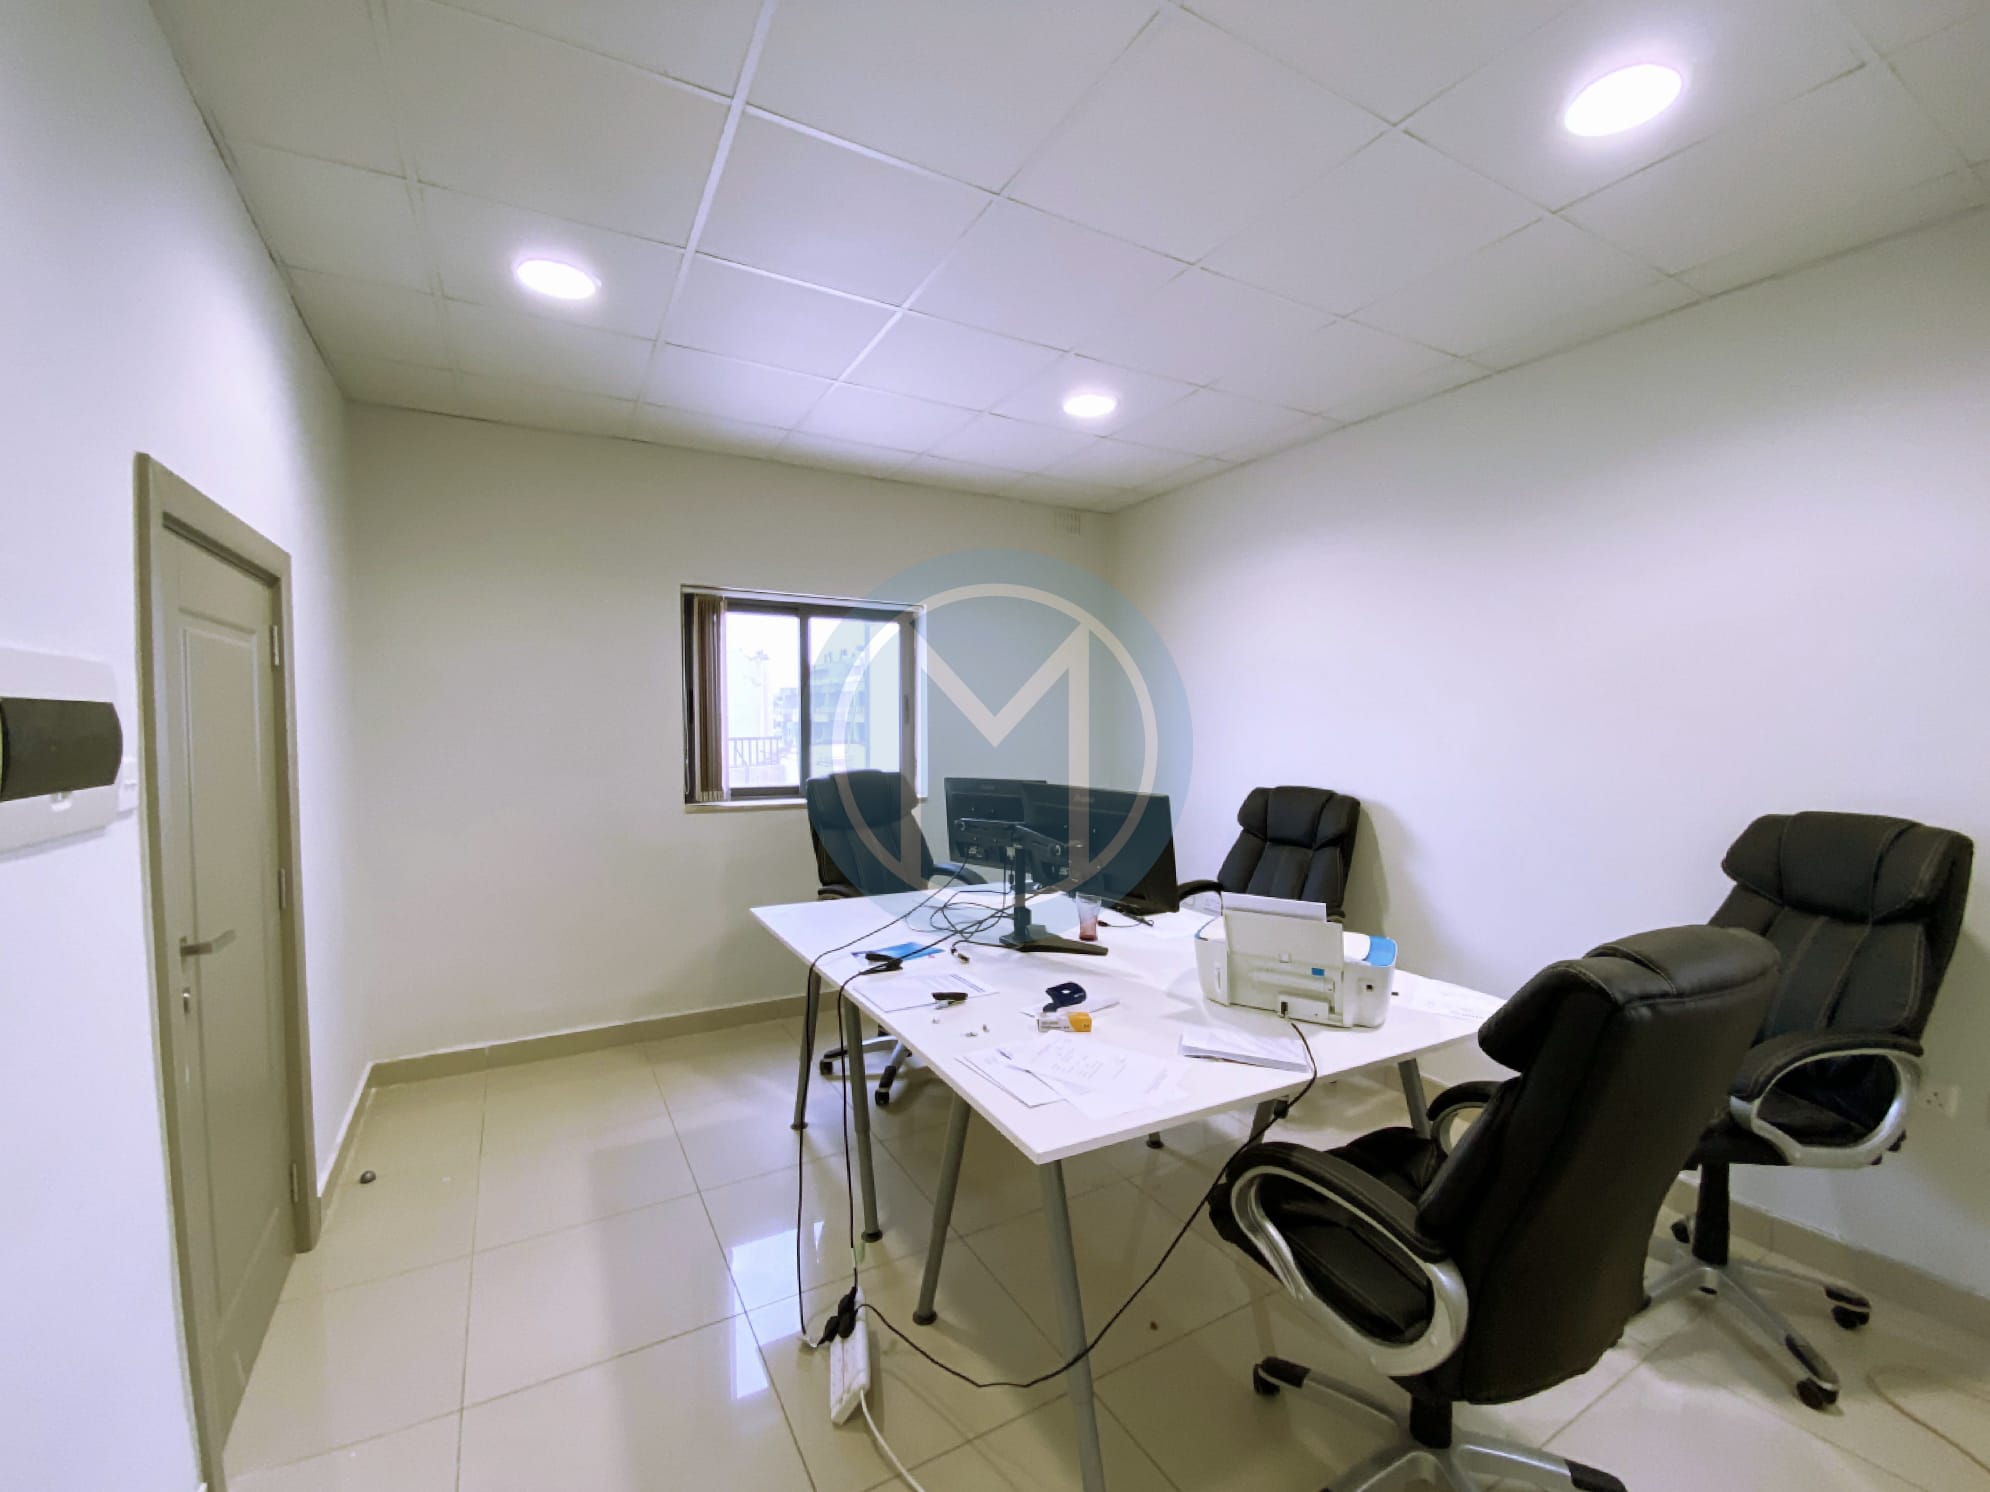 Penthouse Office Space For Rent